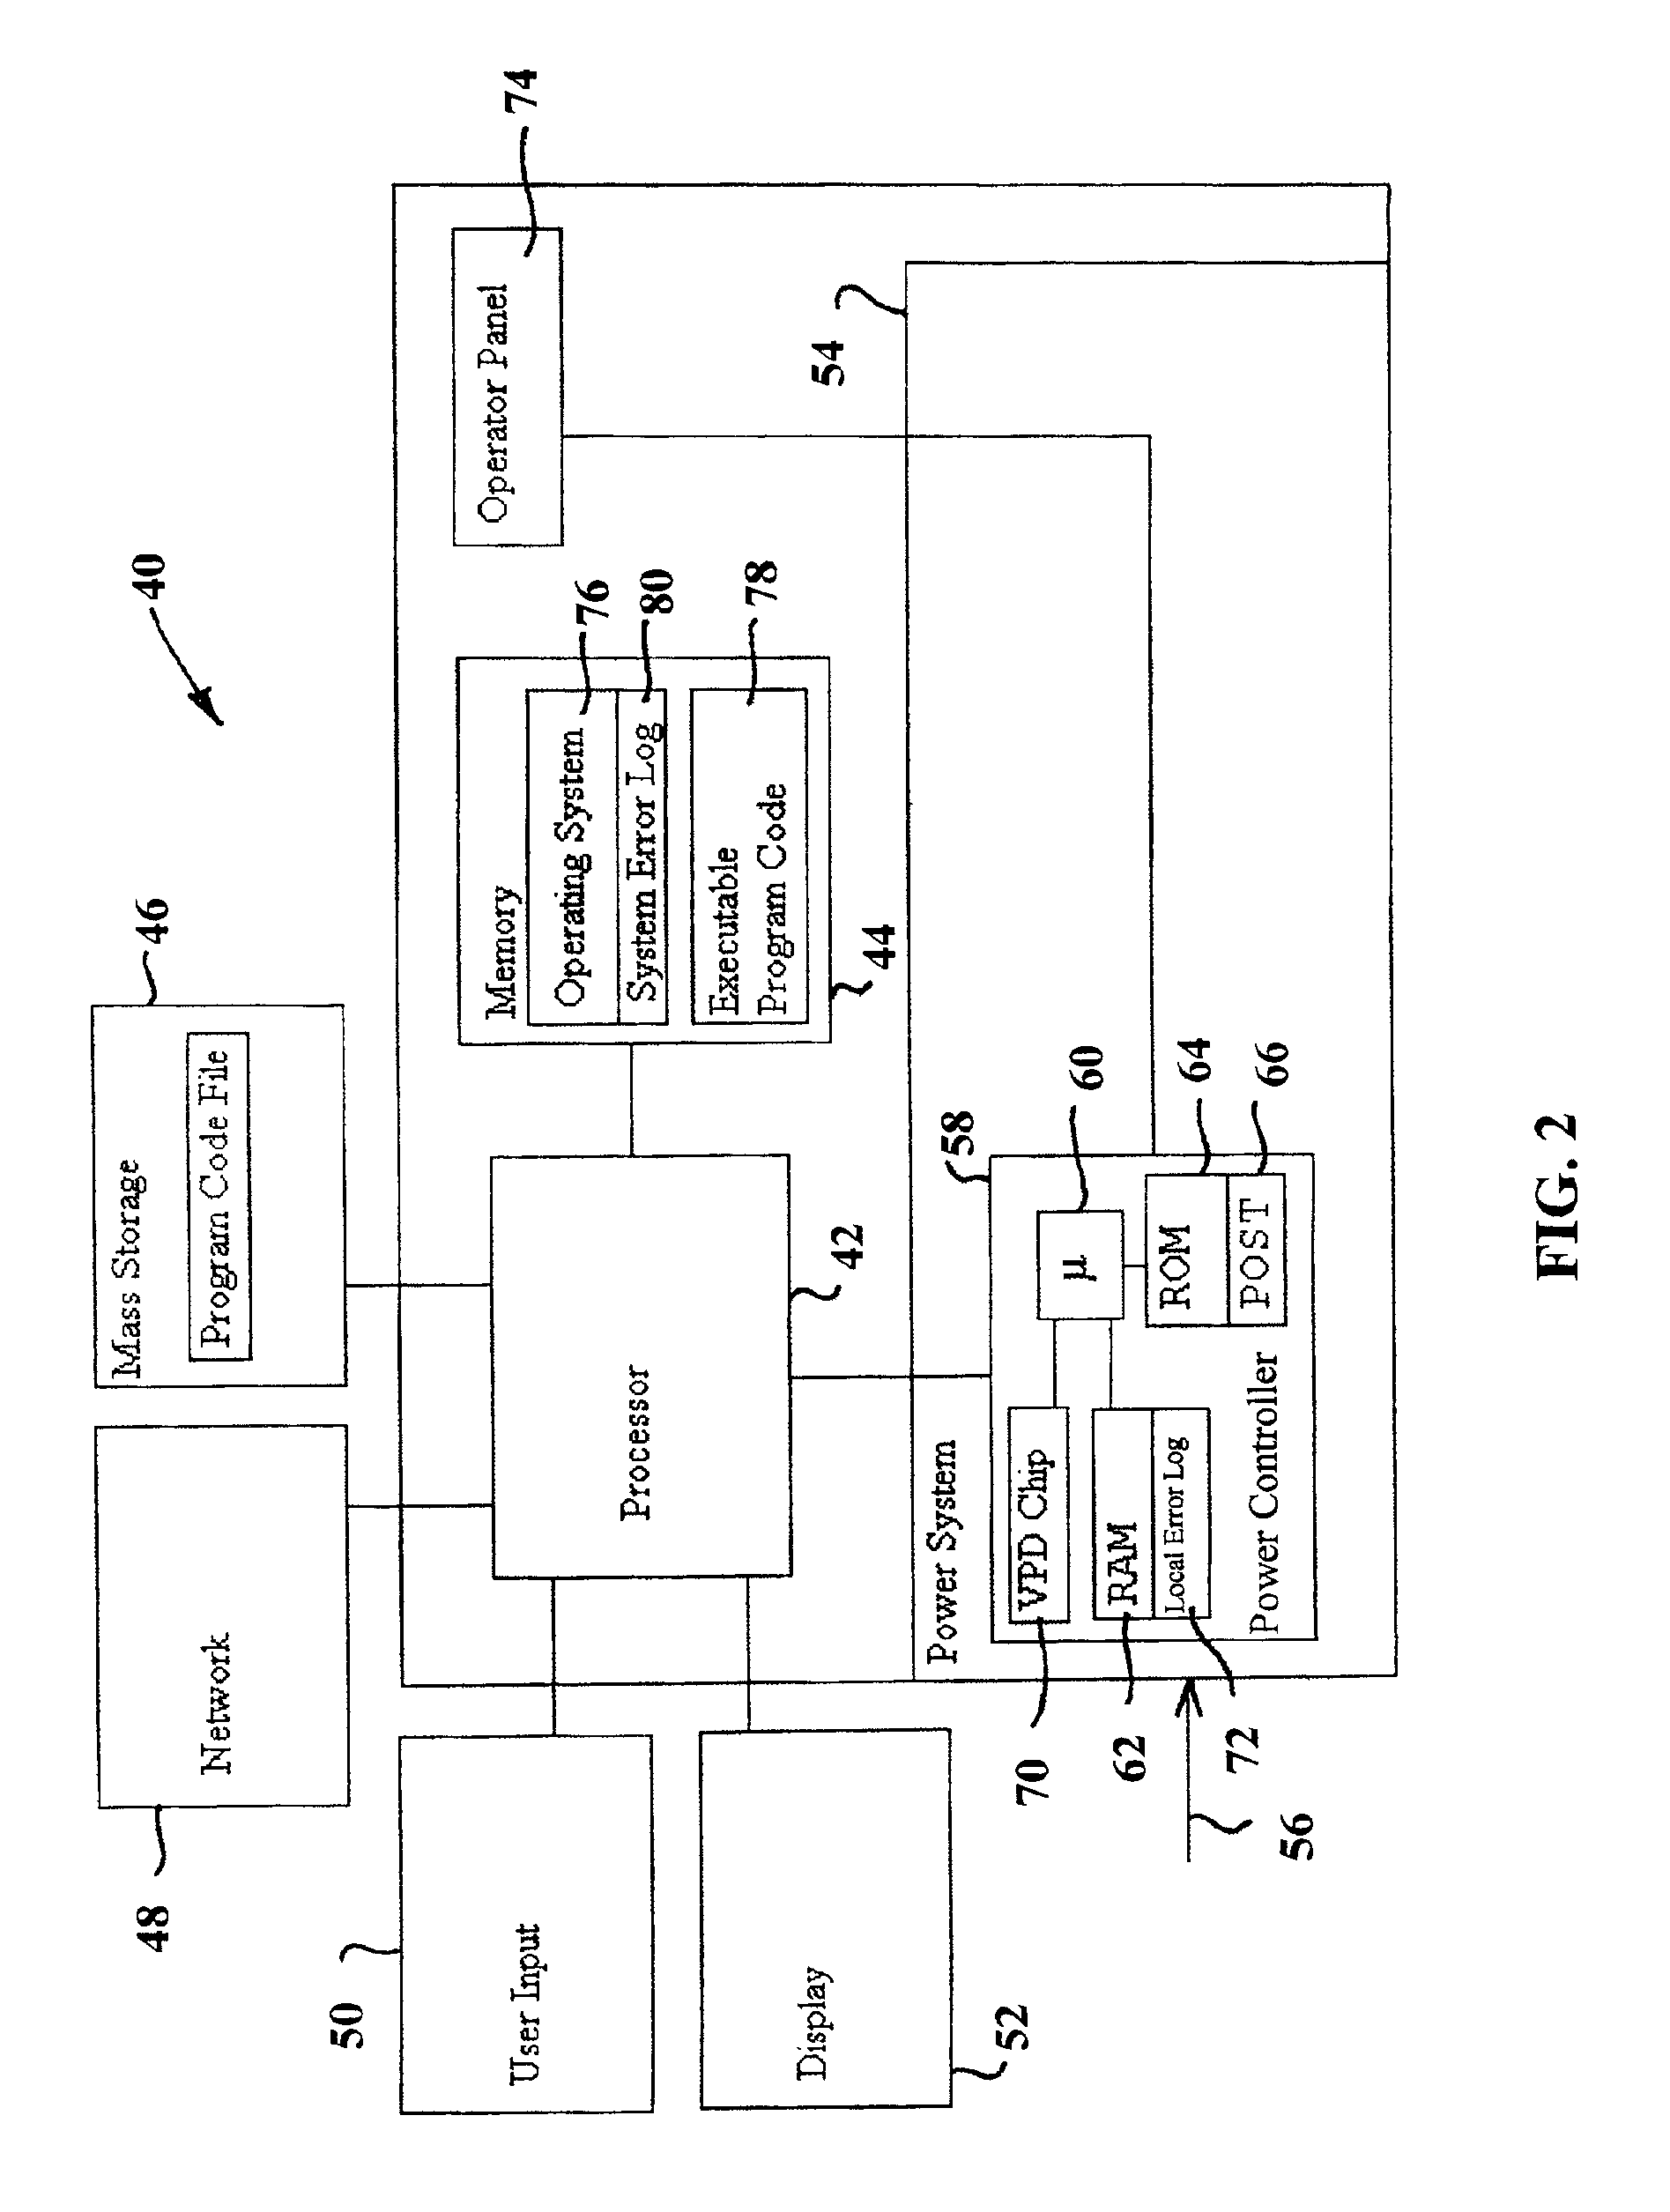 Apparatus, program product and method of performing power fault analysis in a computer system